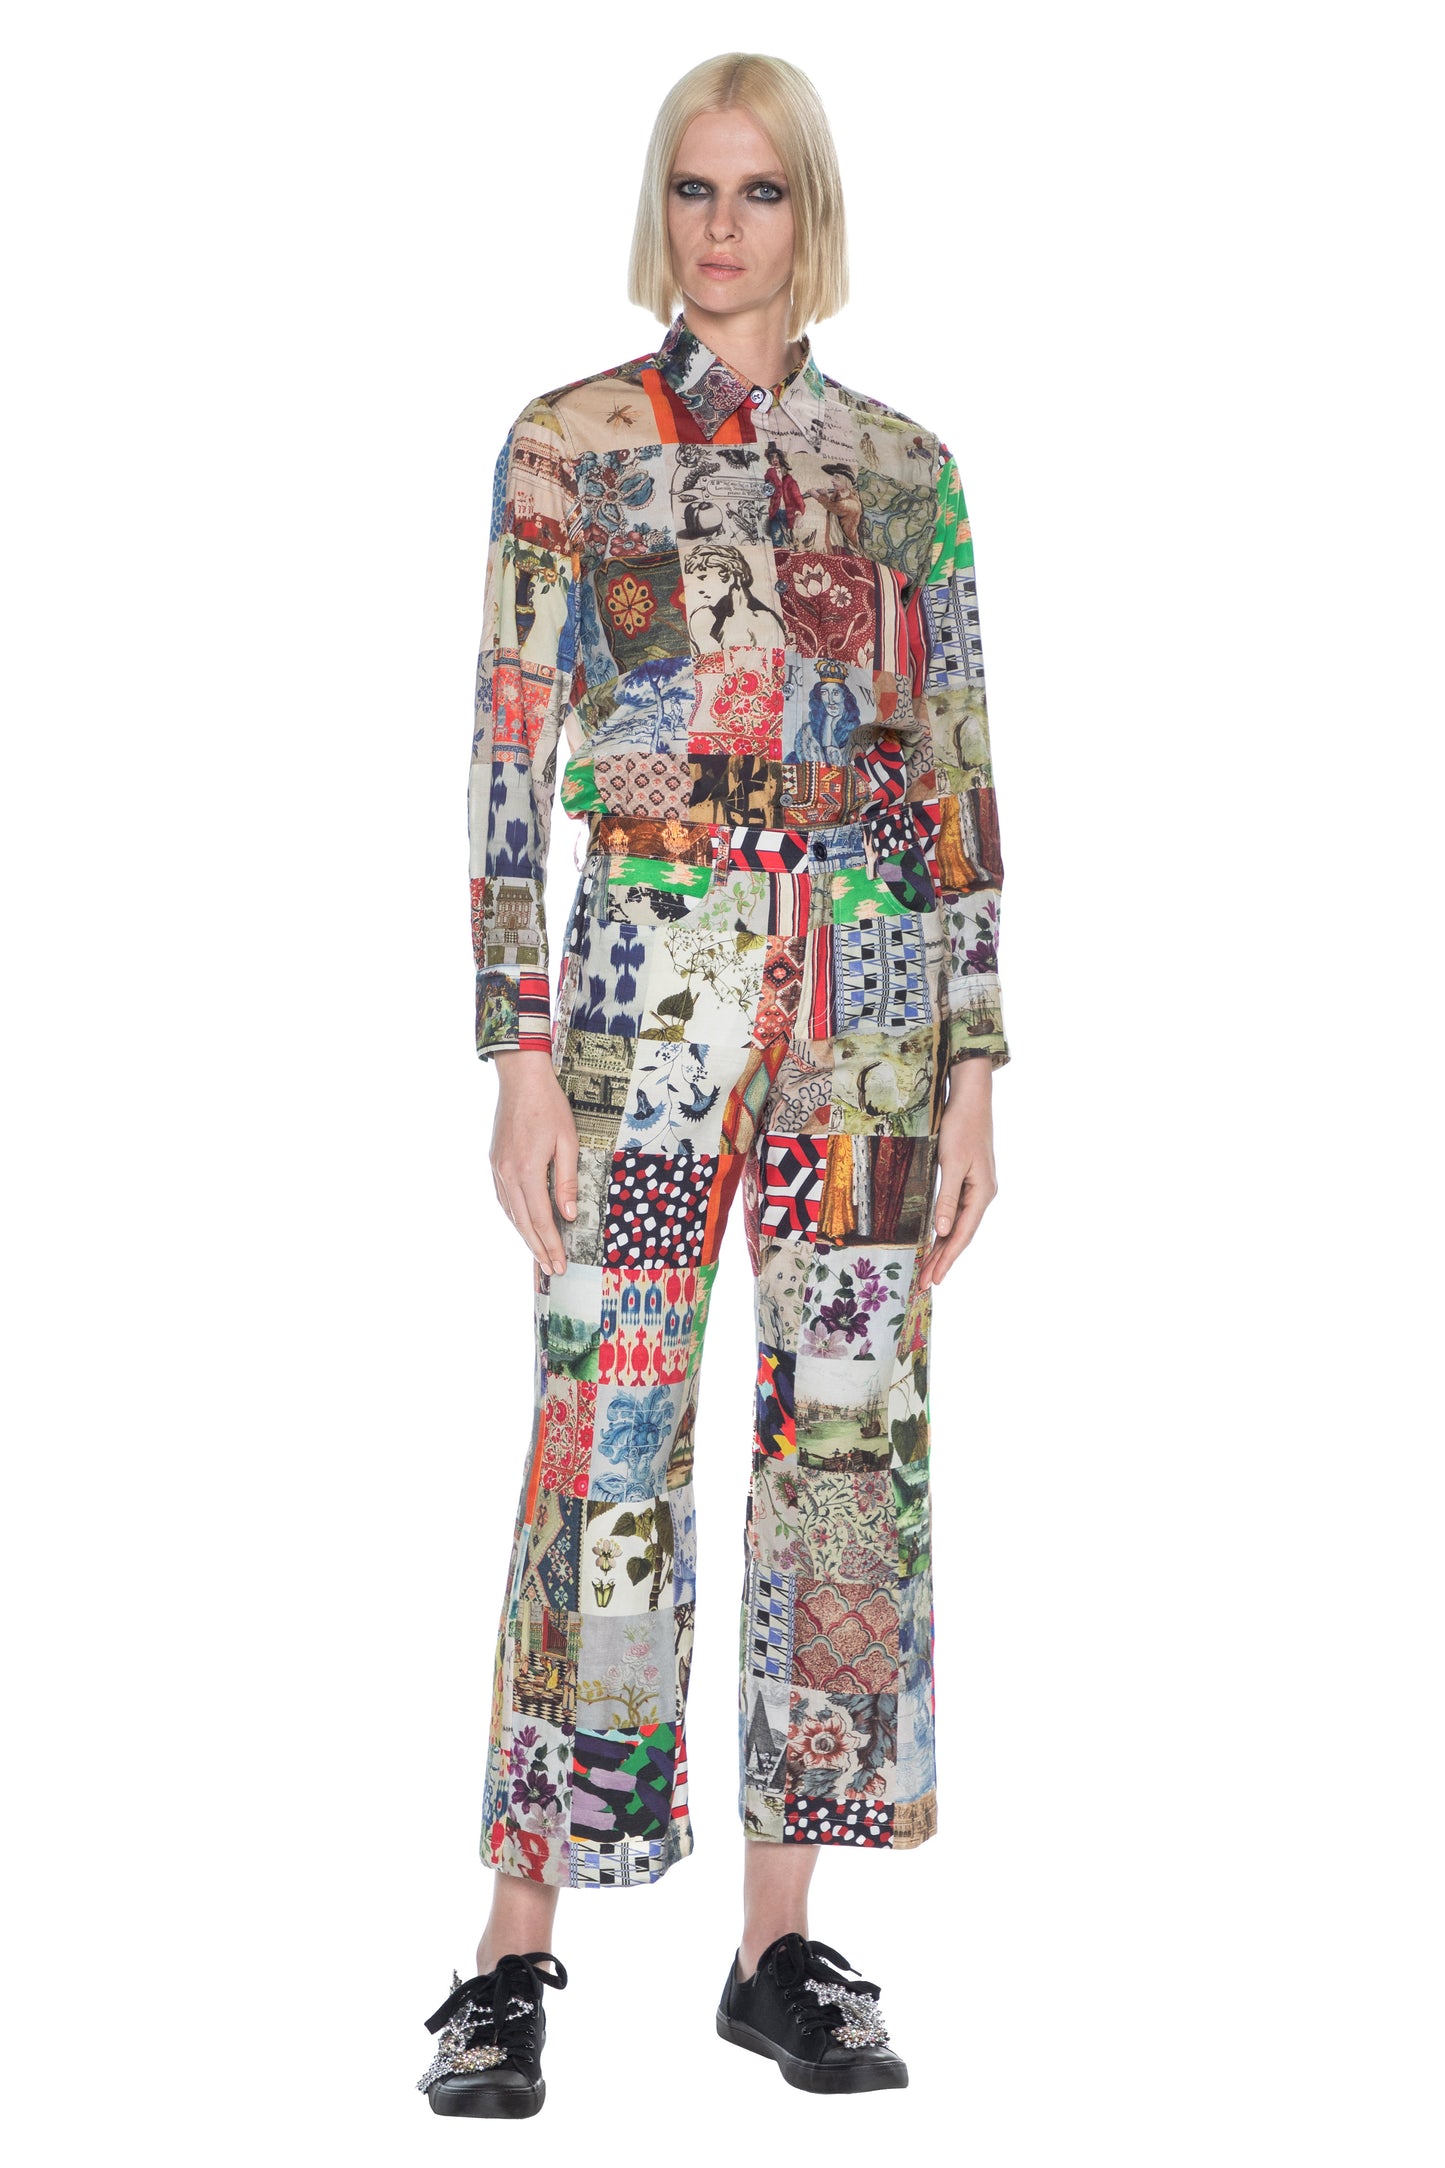 'BLOOMSBURY COLLAGE' CROPPED WIDE LEG PANT